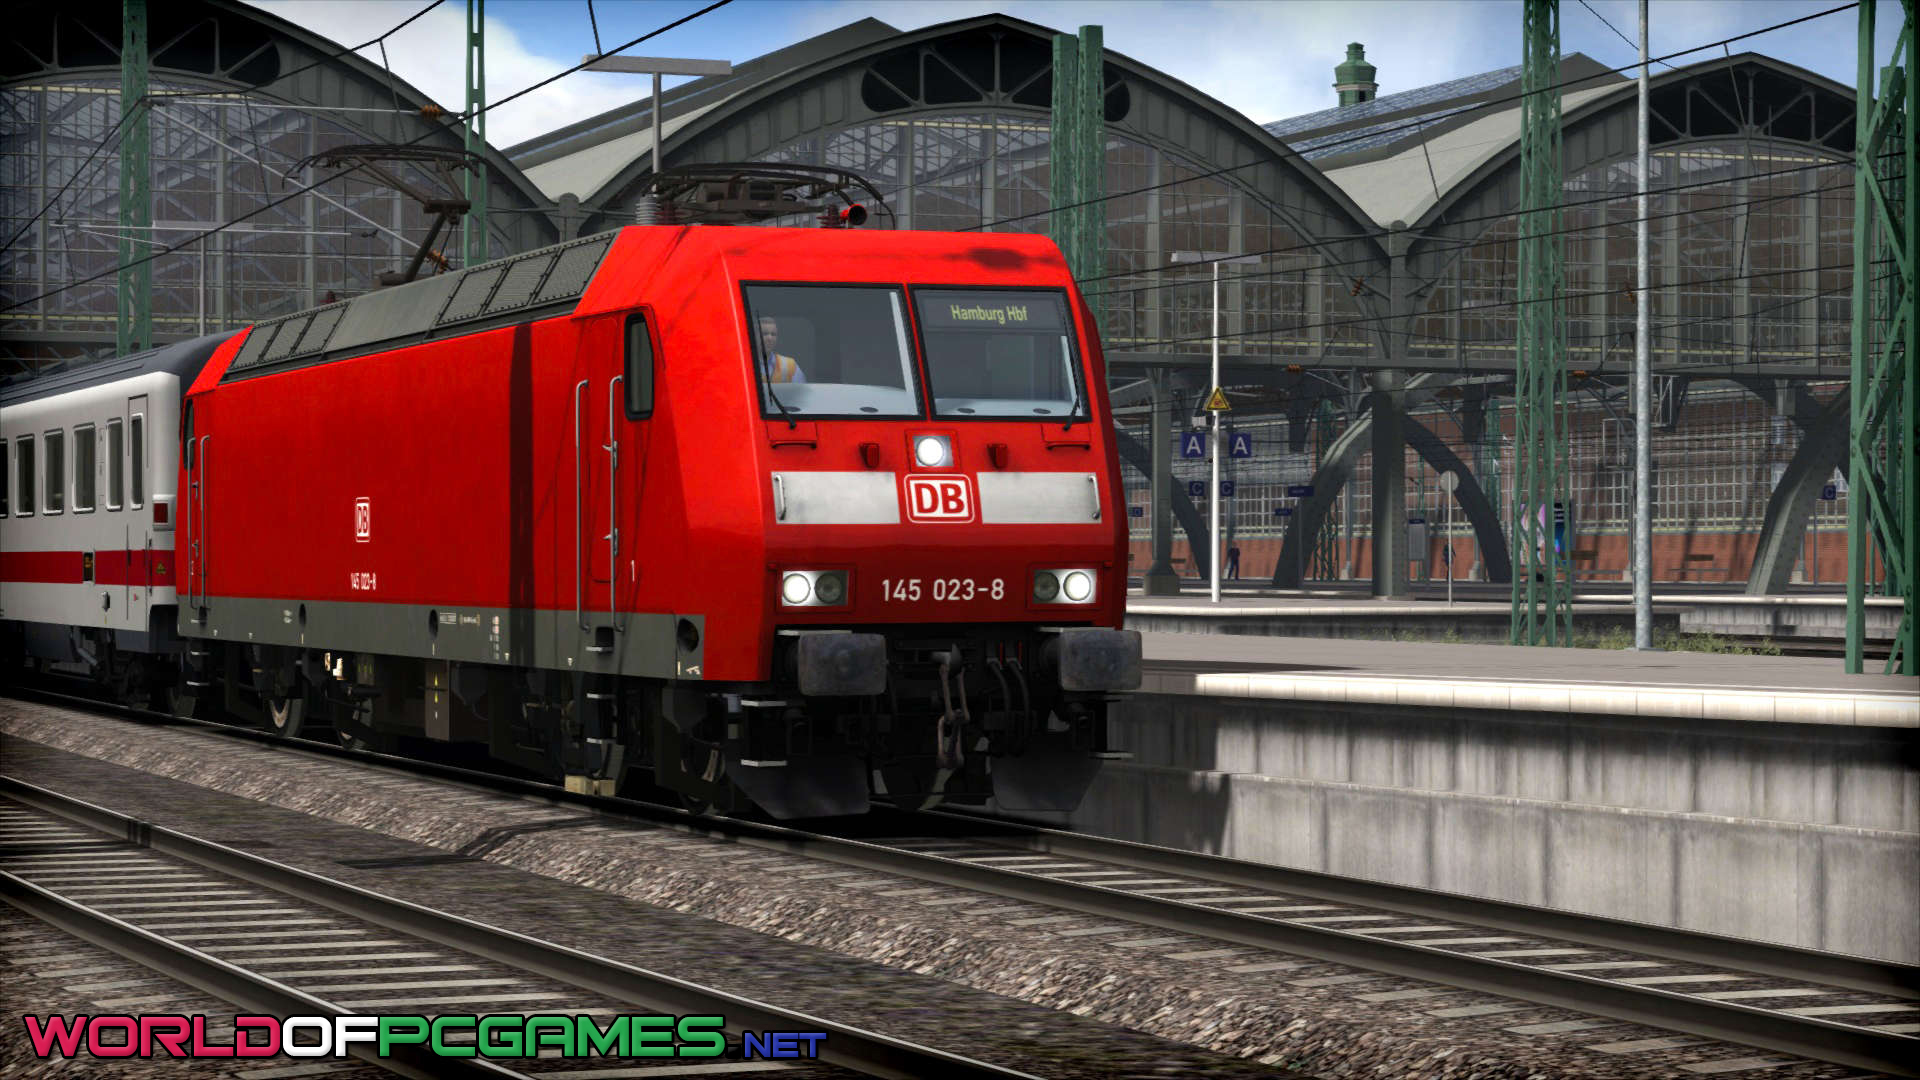 Train Simulator 2017 Free Download With All DLCs - 98